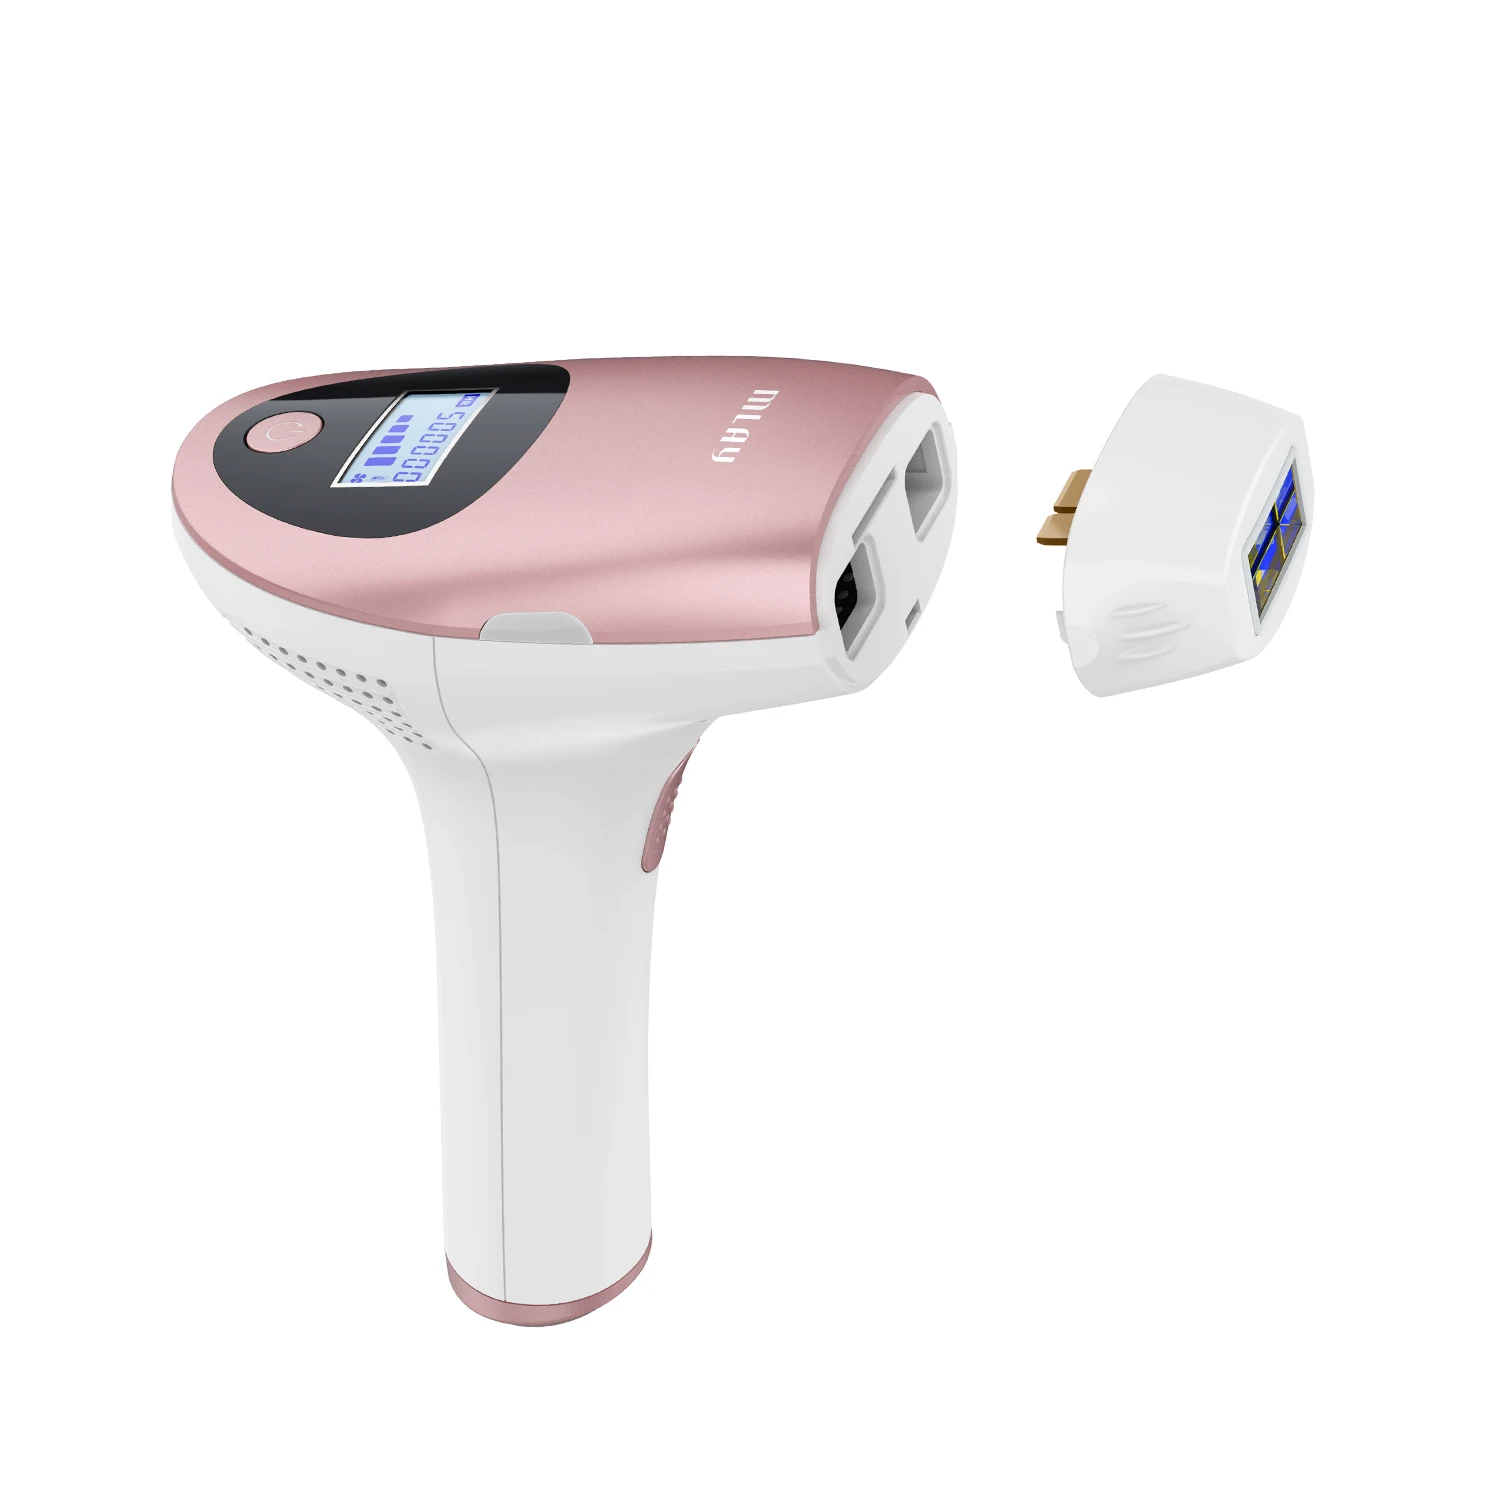 

MLAY IPL Laser Removable hair Handset Device From Home Use Laser Beauty Equipment Painless Permanent for Whole Body Portable, Pink /blue /green